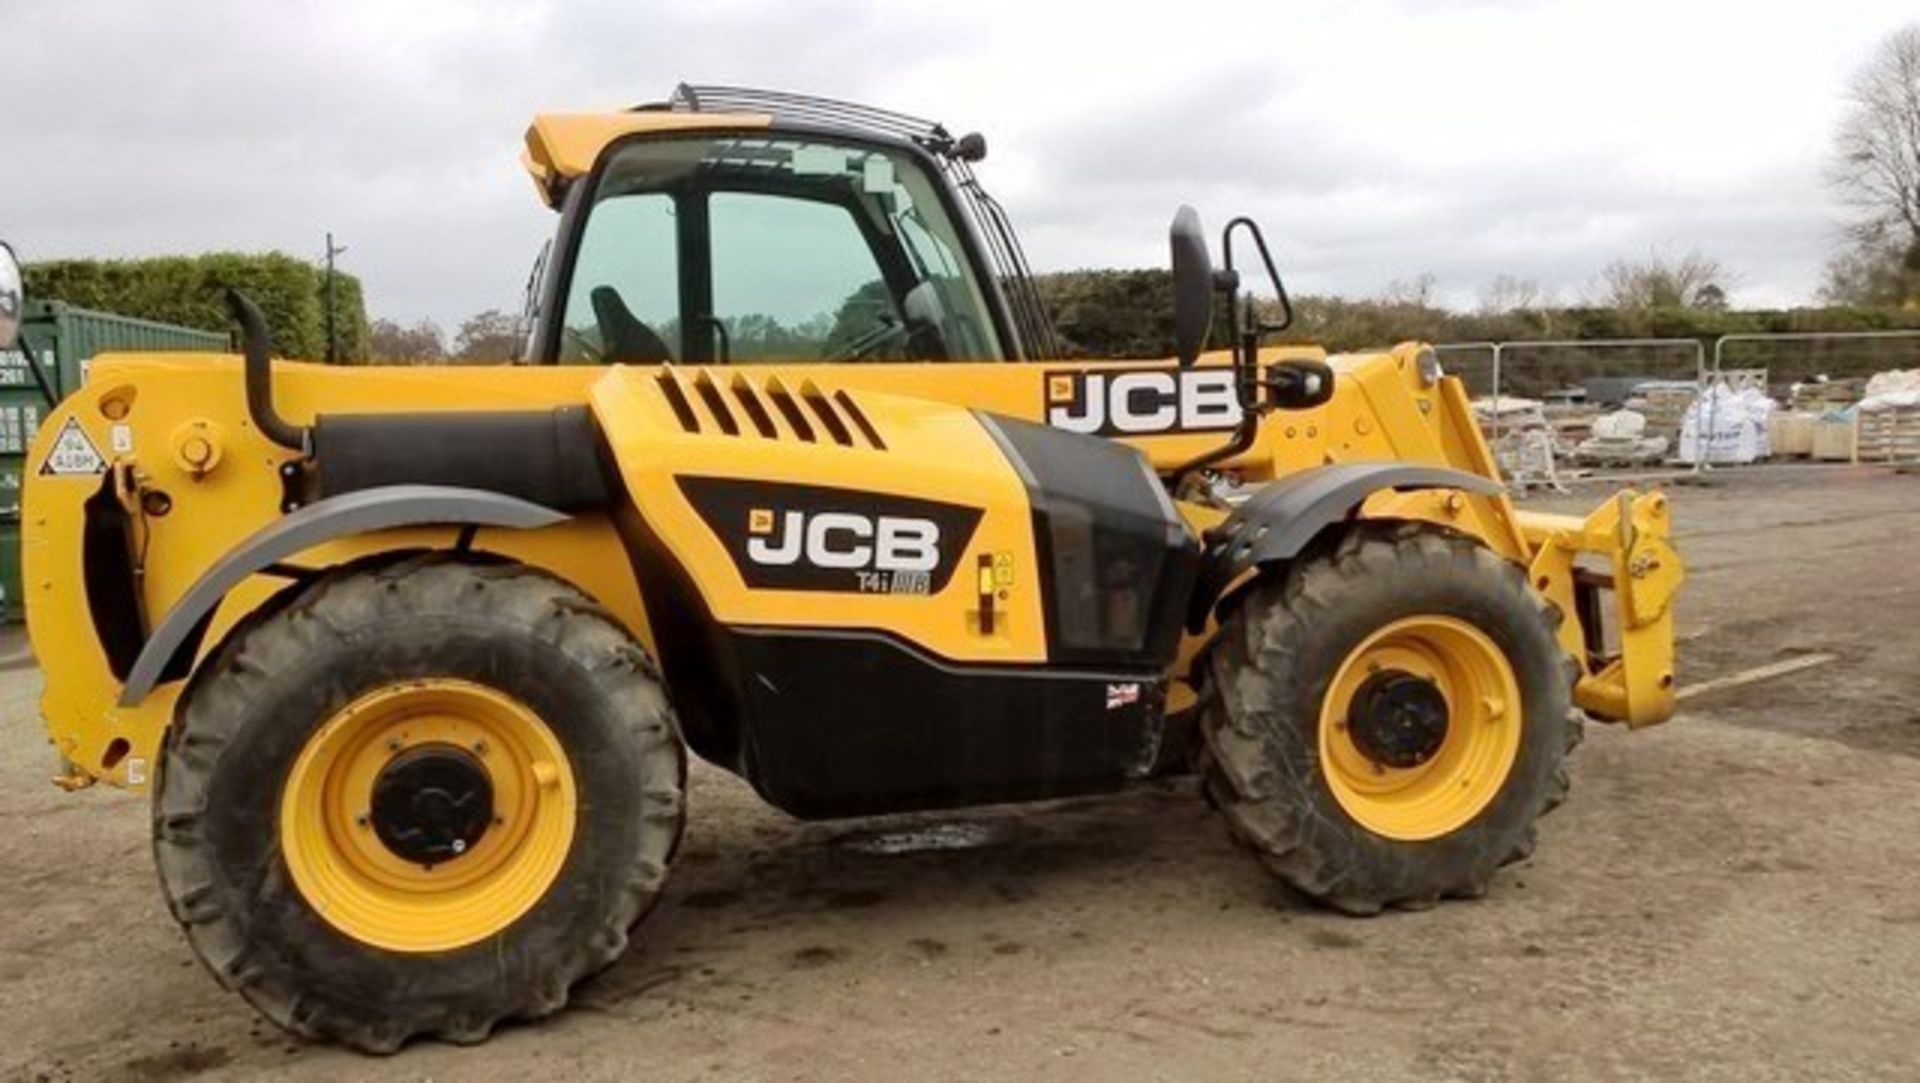 2014 JCB 531-70 TELEHANDLER, SN 2181521, 1399 HOURS, AUX PIPE WORK, MANUAL QUICK HITCH, 60% TYRE - Image 9 of 13